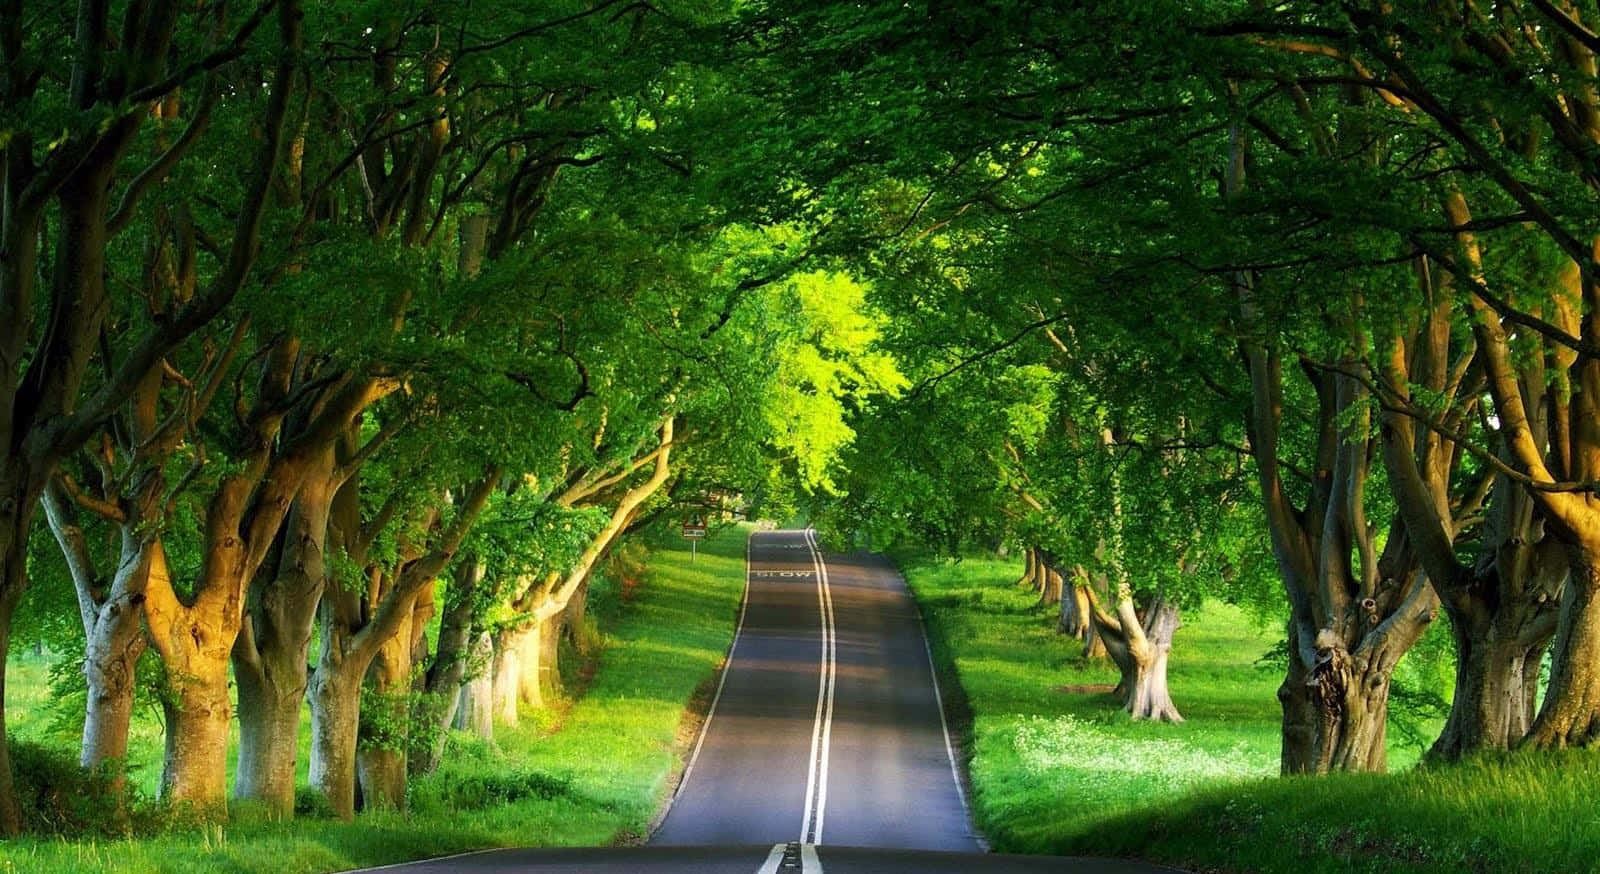 Tranquil Journey - An Enthralling View Of A Serene Road Wallpaper